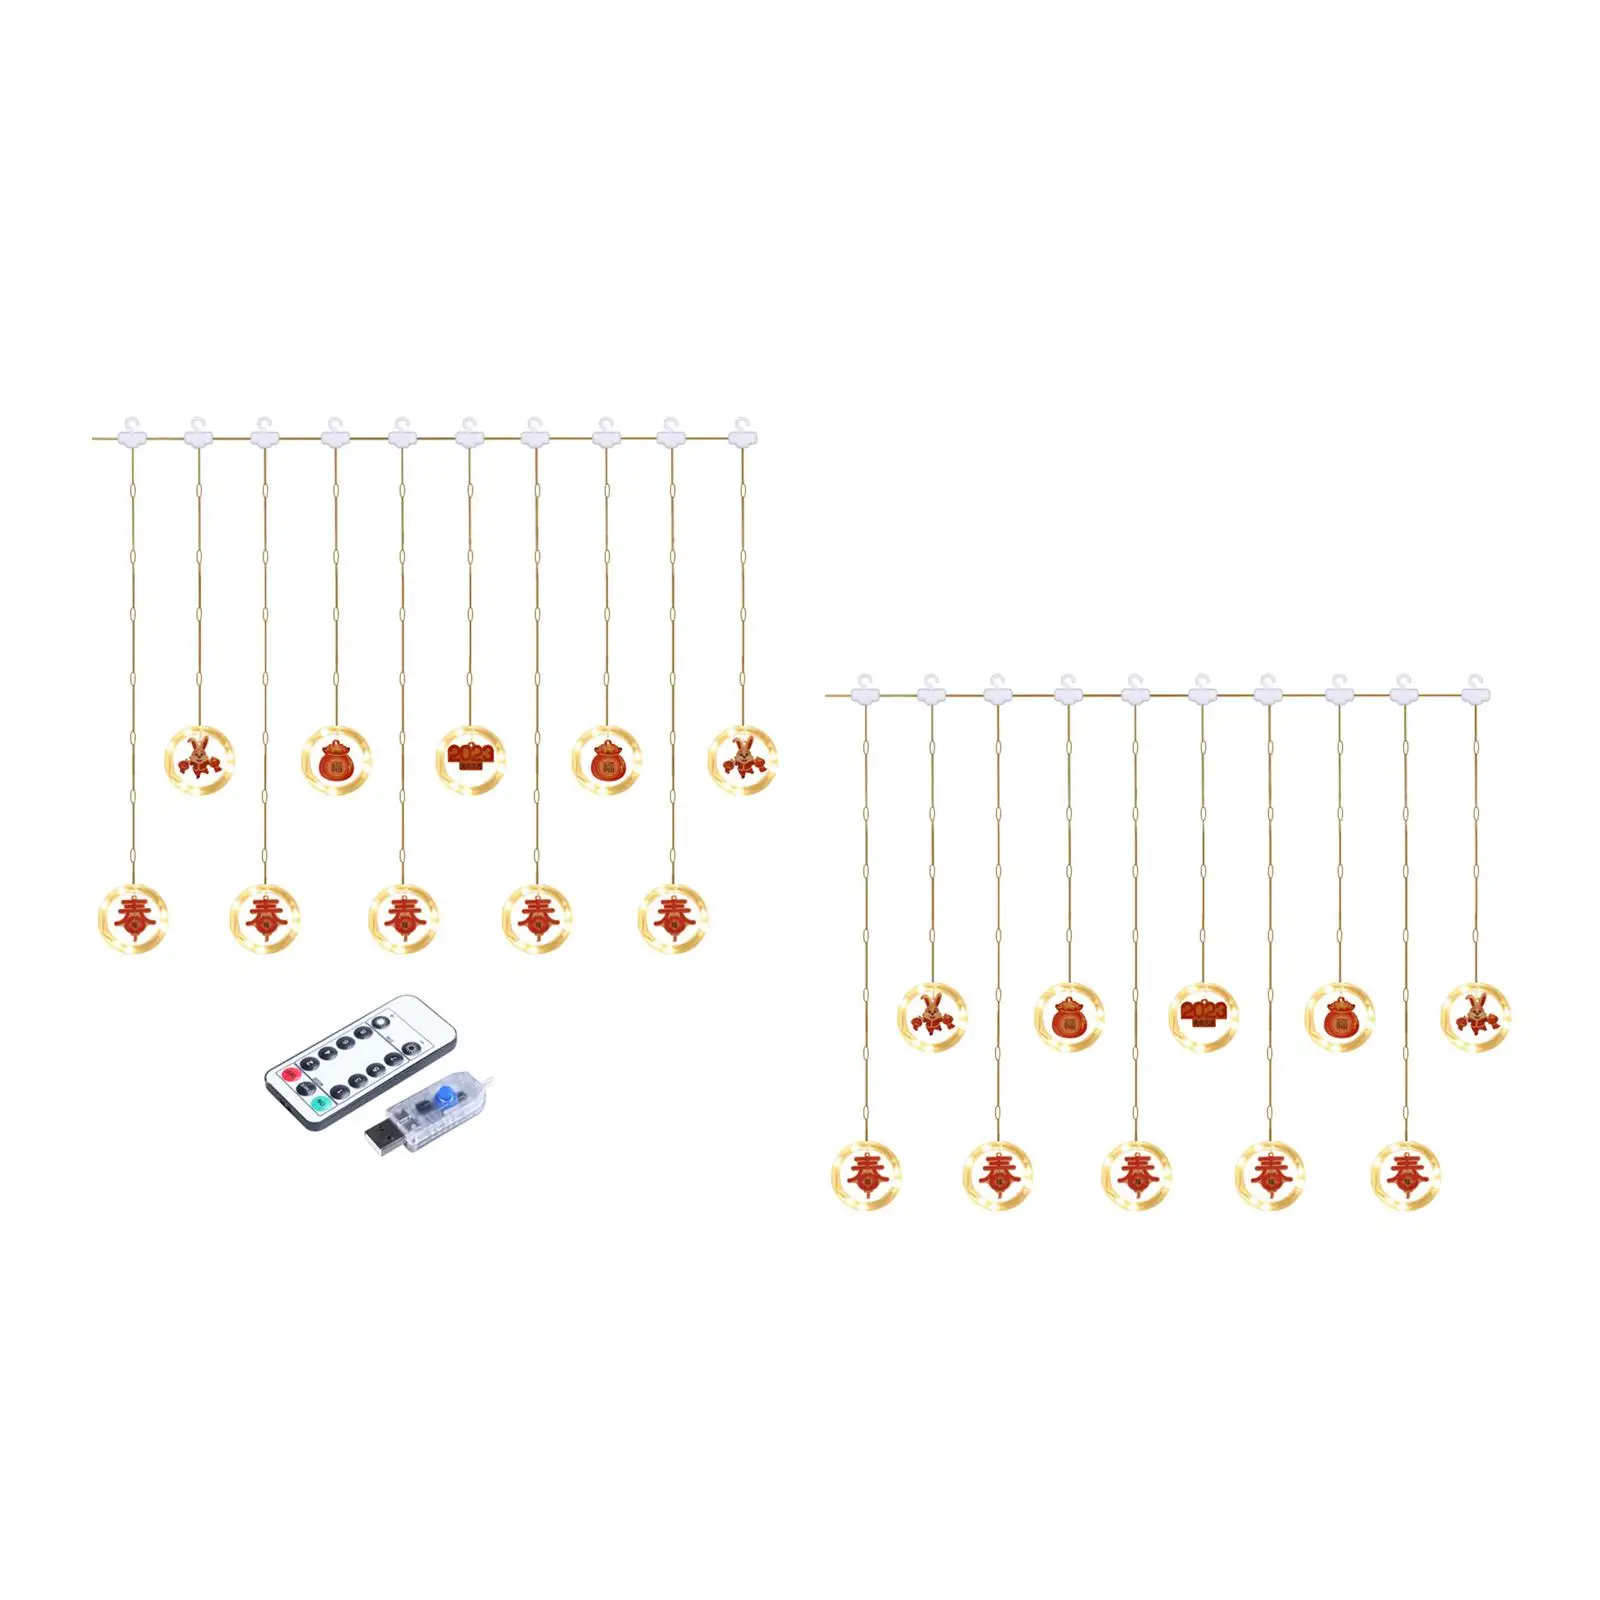 Chinese New Year Icicle Light Outdoor Indoor Ornament for Porch House Party